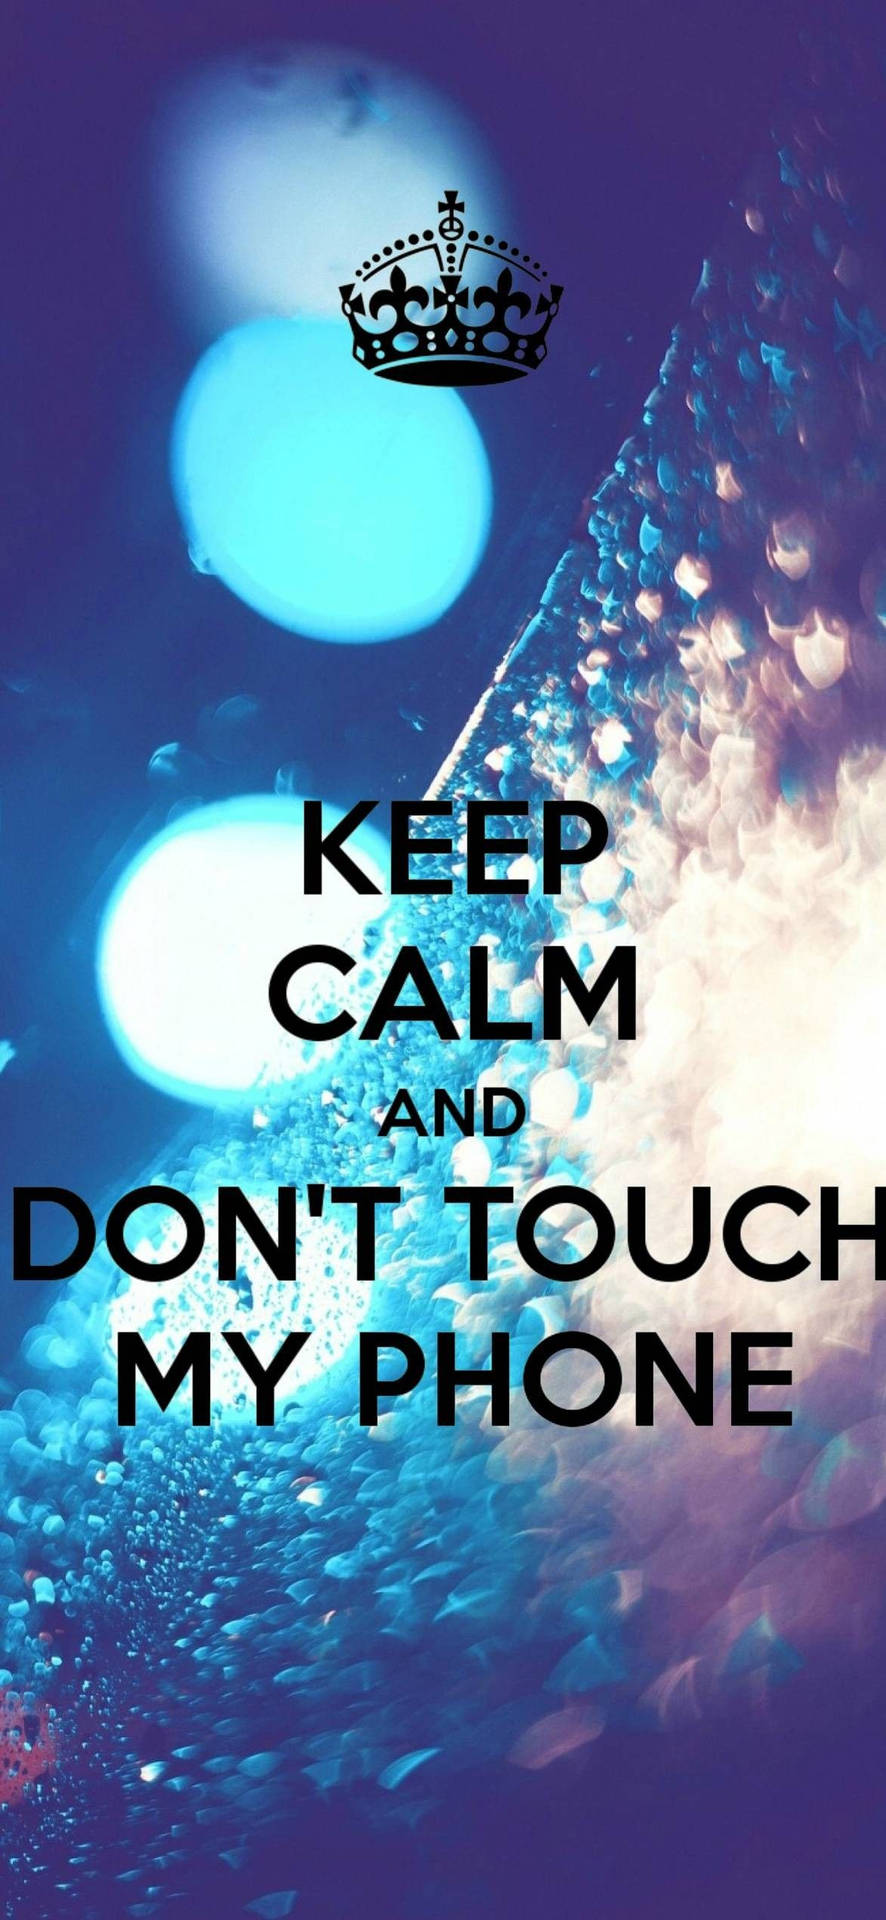 Dont Touch My Phone 1173X2542 wallpaper